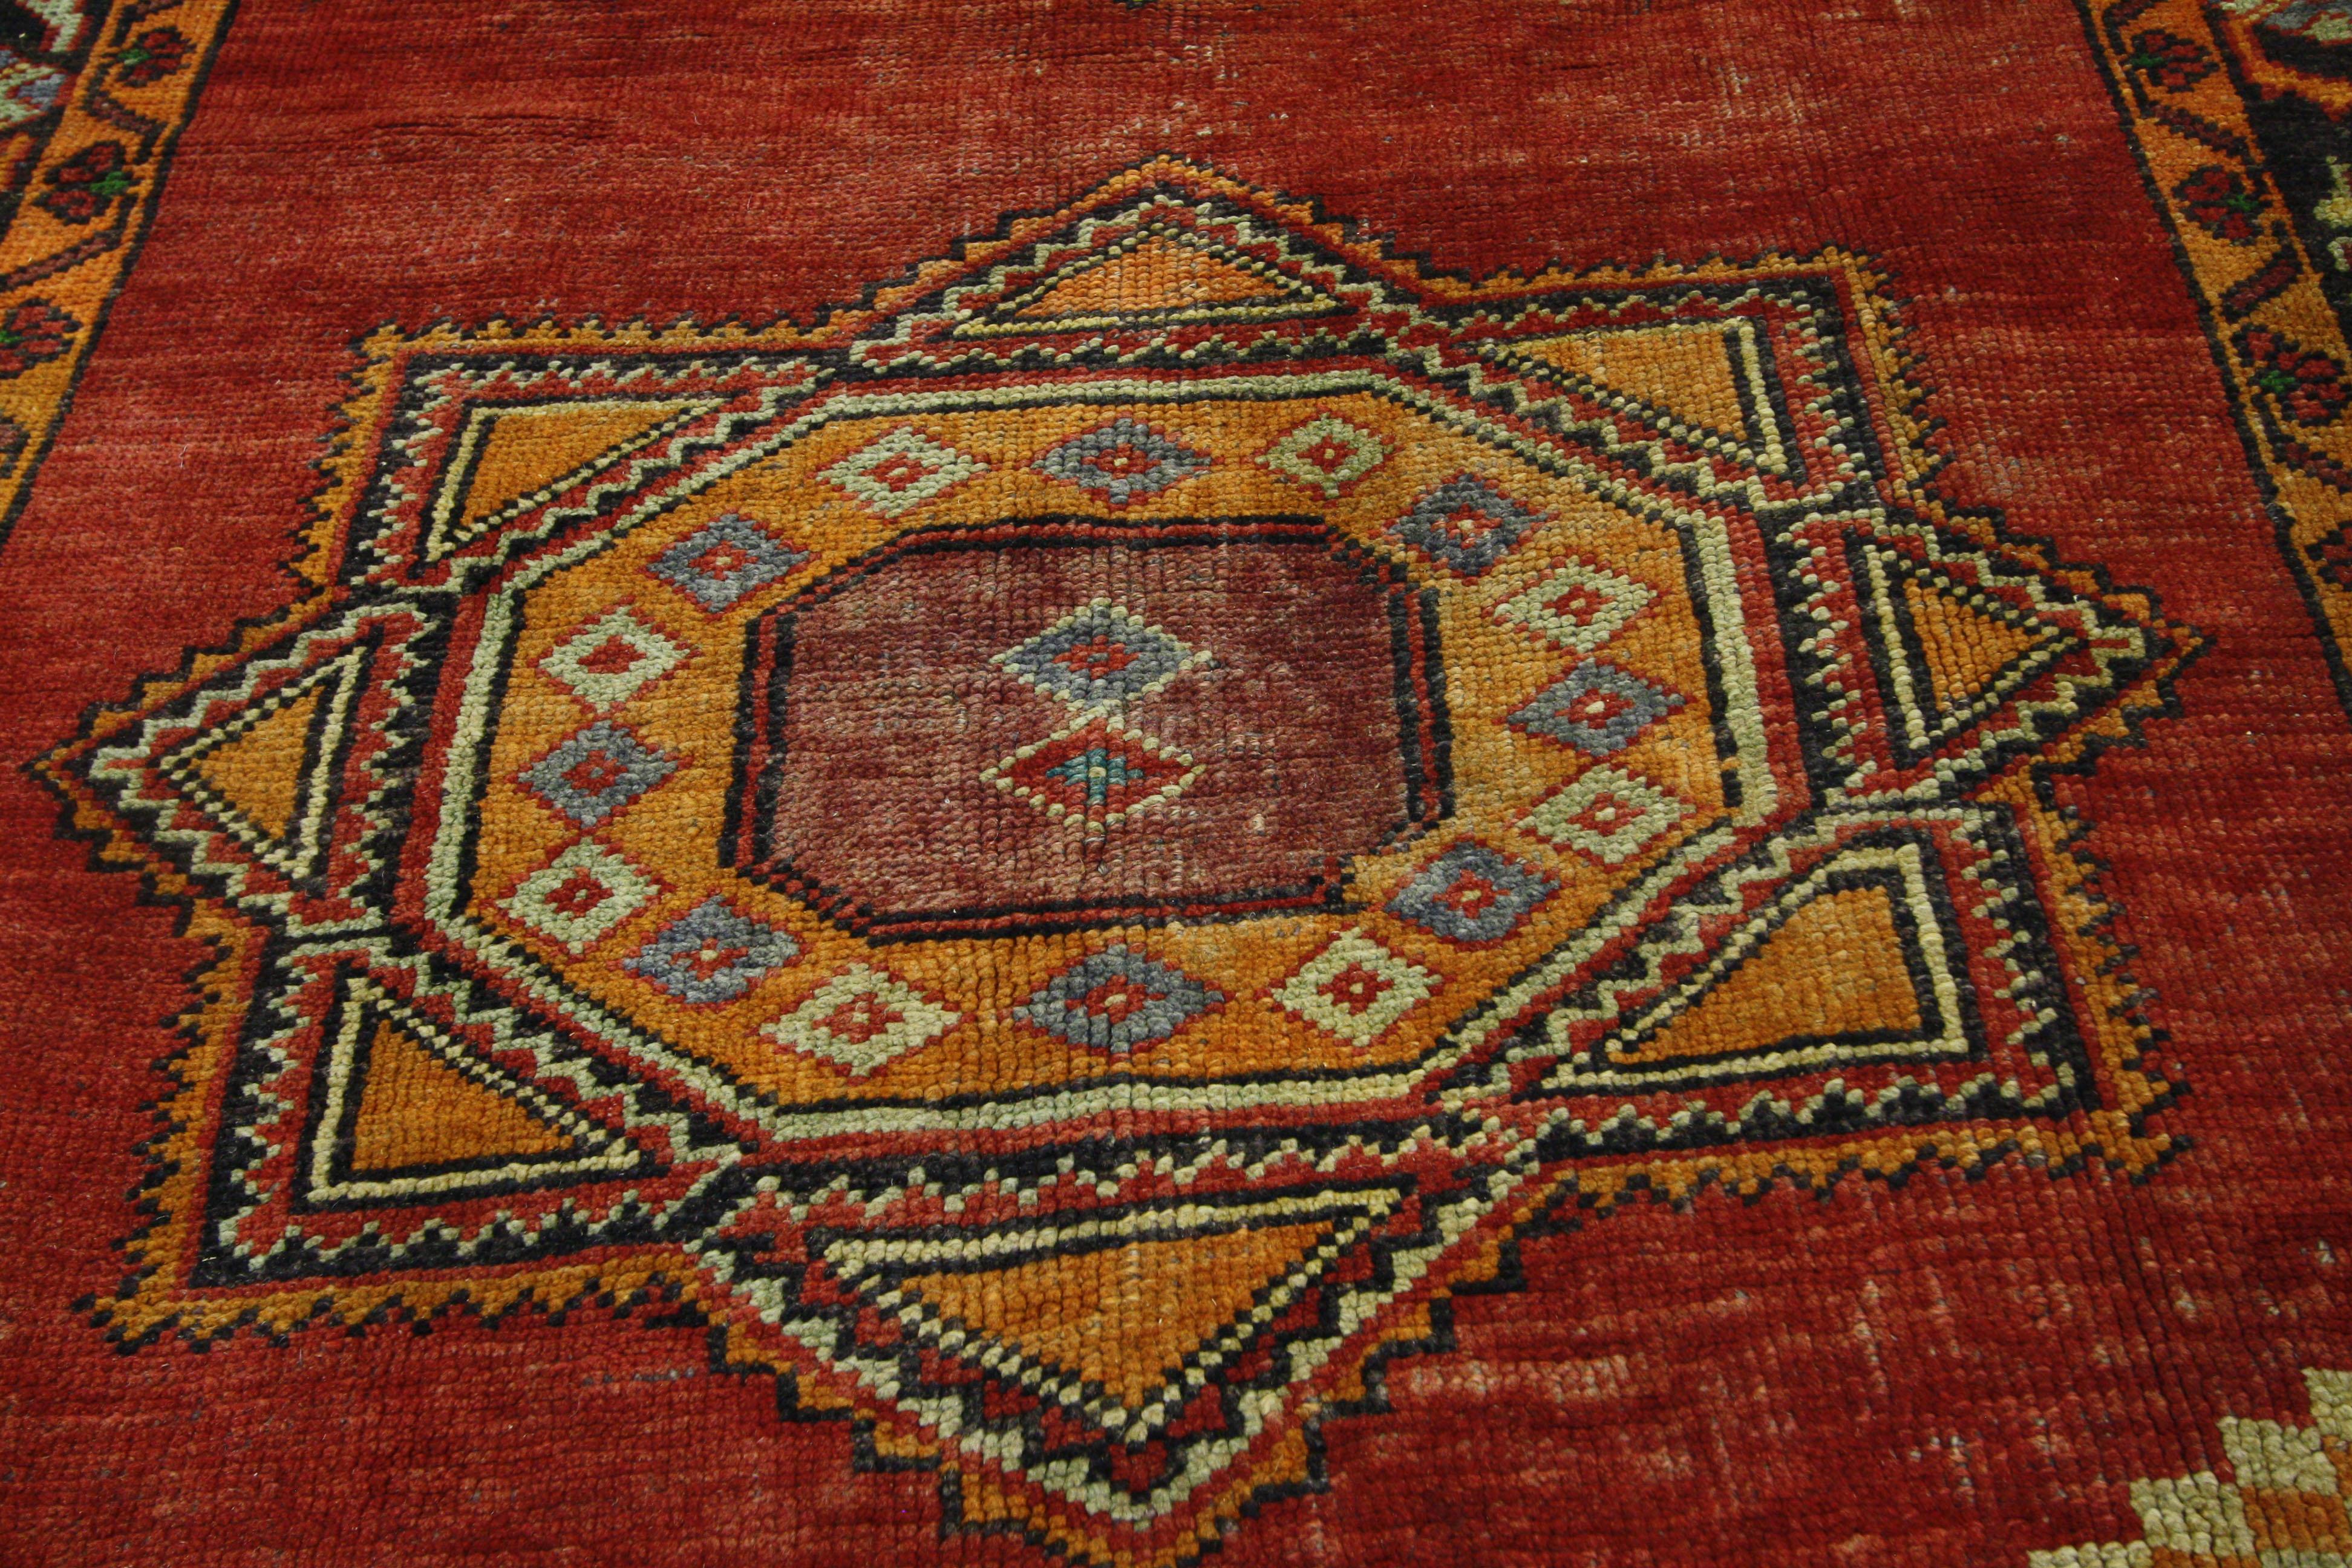 Vintage Turkish Oushak Hallway Runner with Craftsman Tribal Style In Good Condition For Sale In Dallas, TX